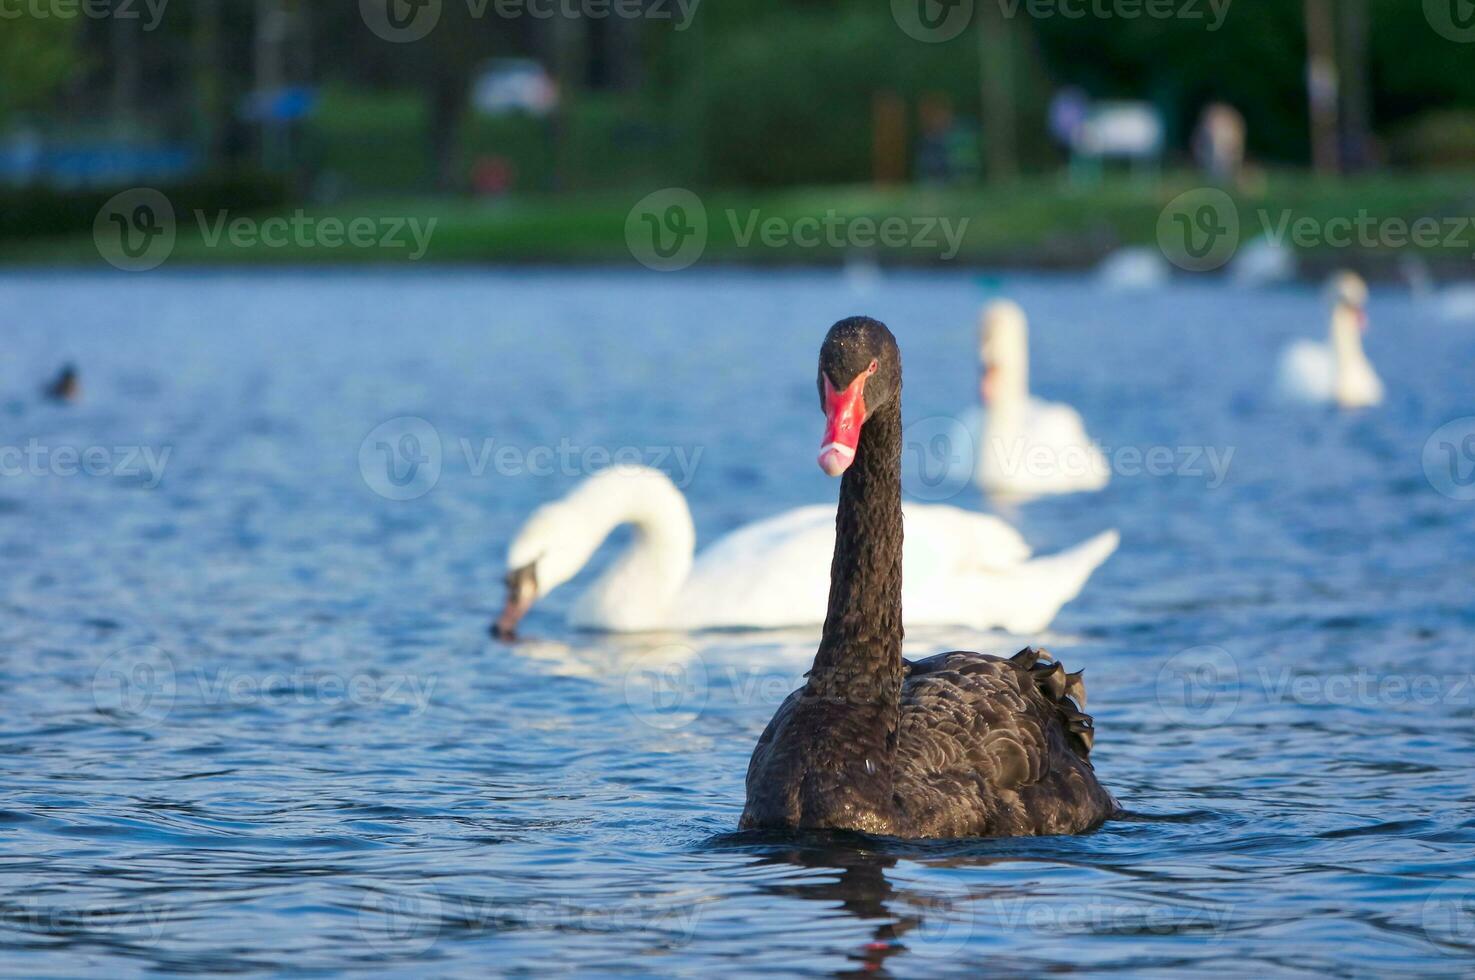 Cute and Unique Black Swan at Willen Lake of Milton Keynes, England UK. Image Was Captured on May 11th, 2023 photo